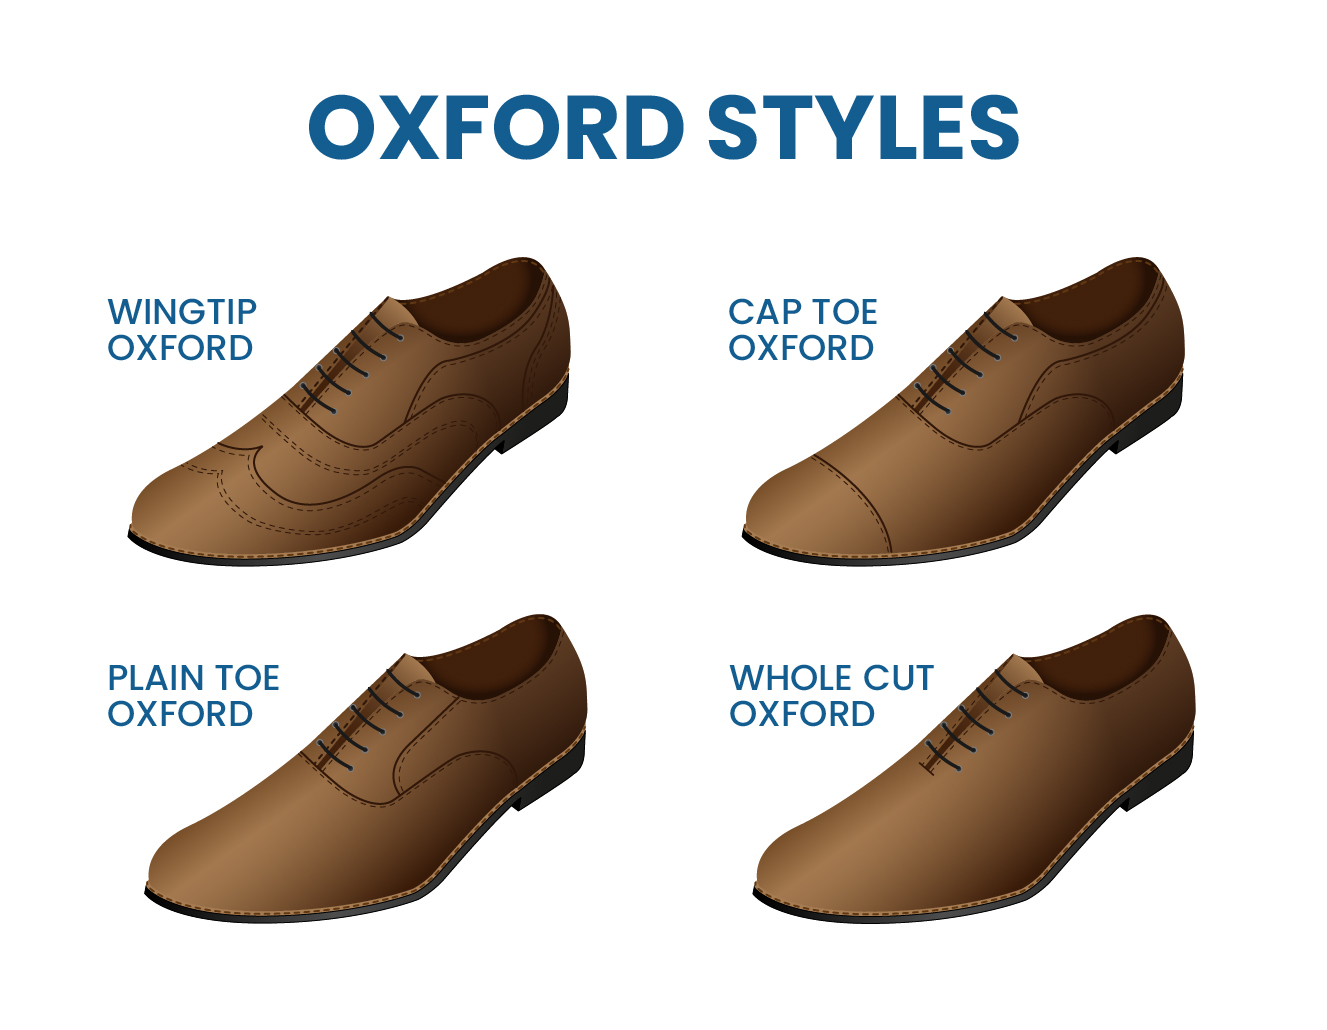 Different Ways to Wear Oxford Shoes for Men - Suits Expert